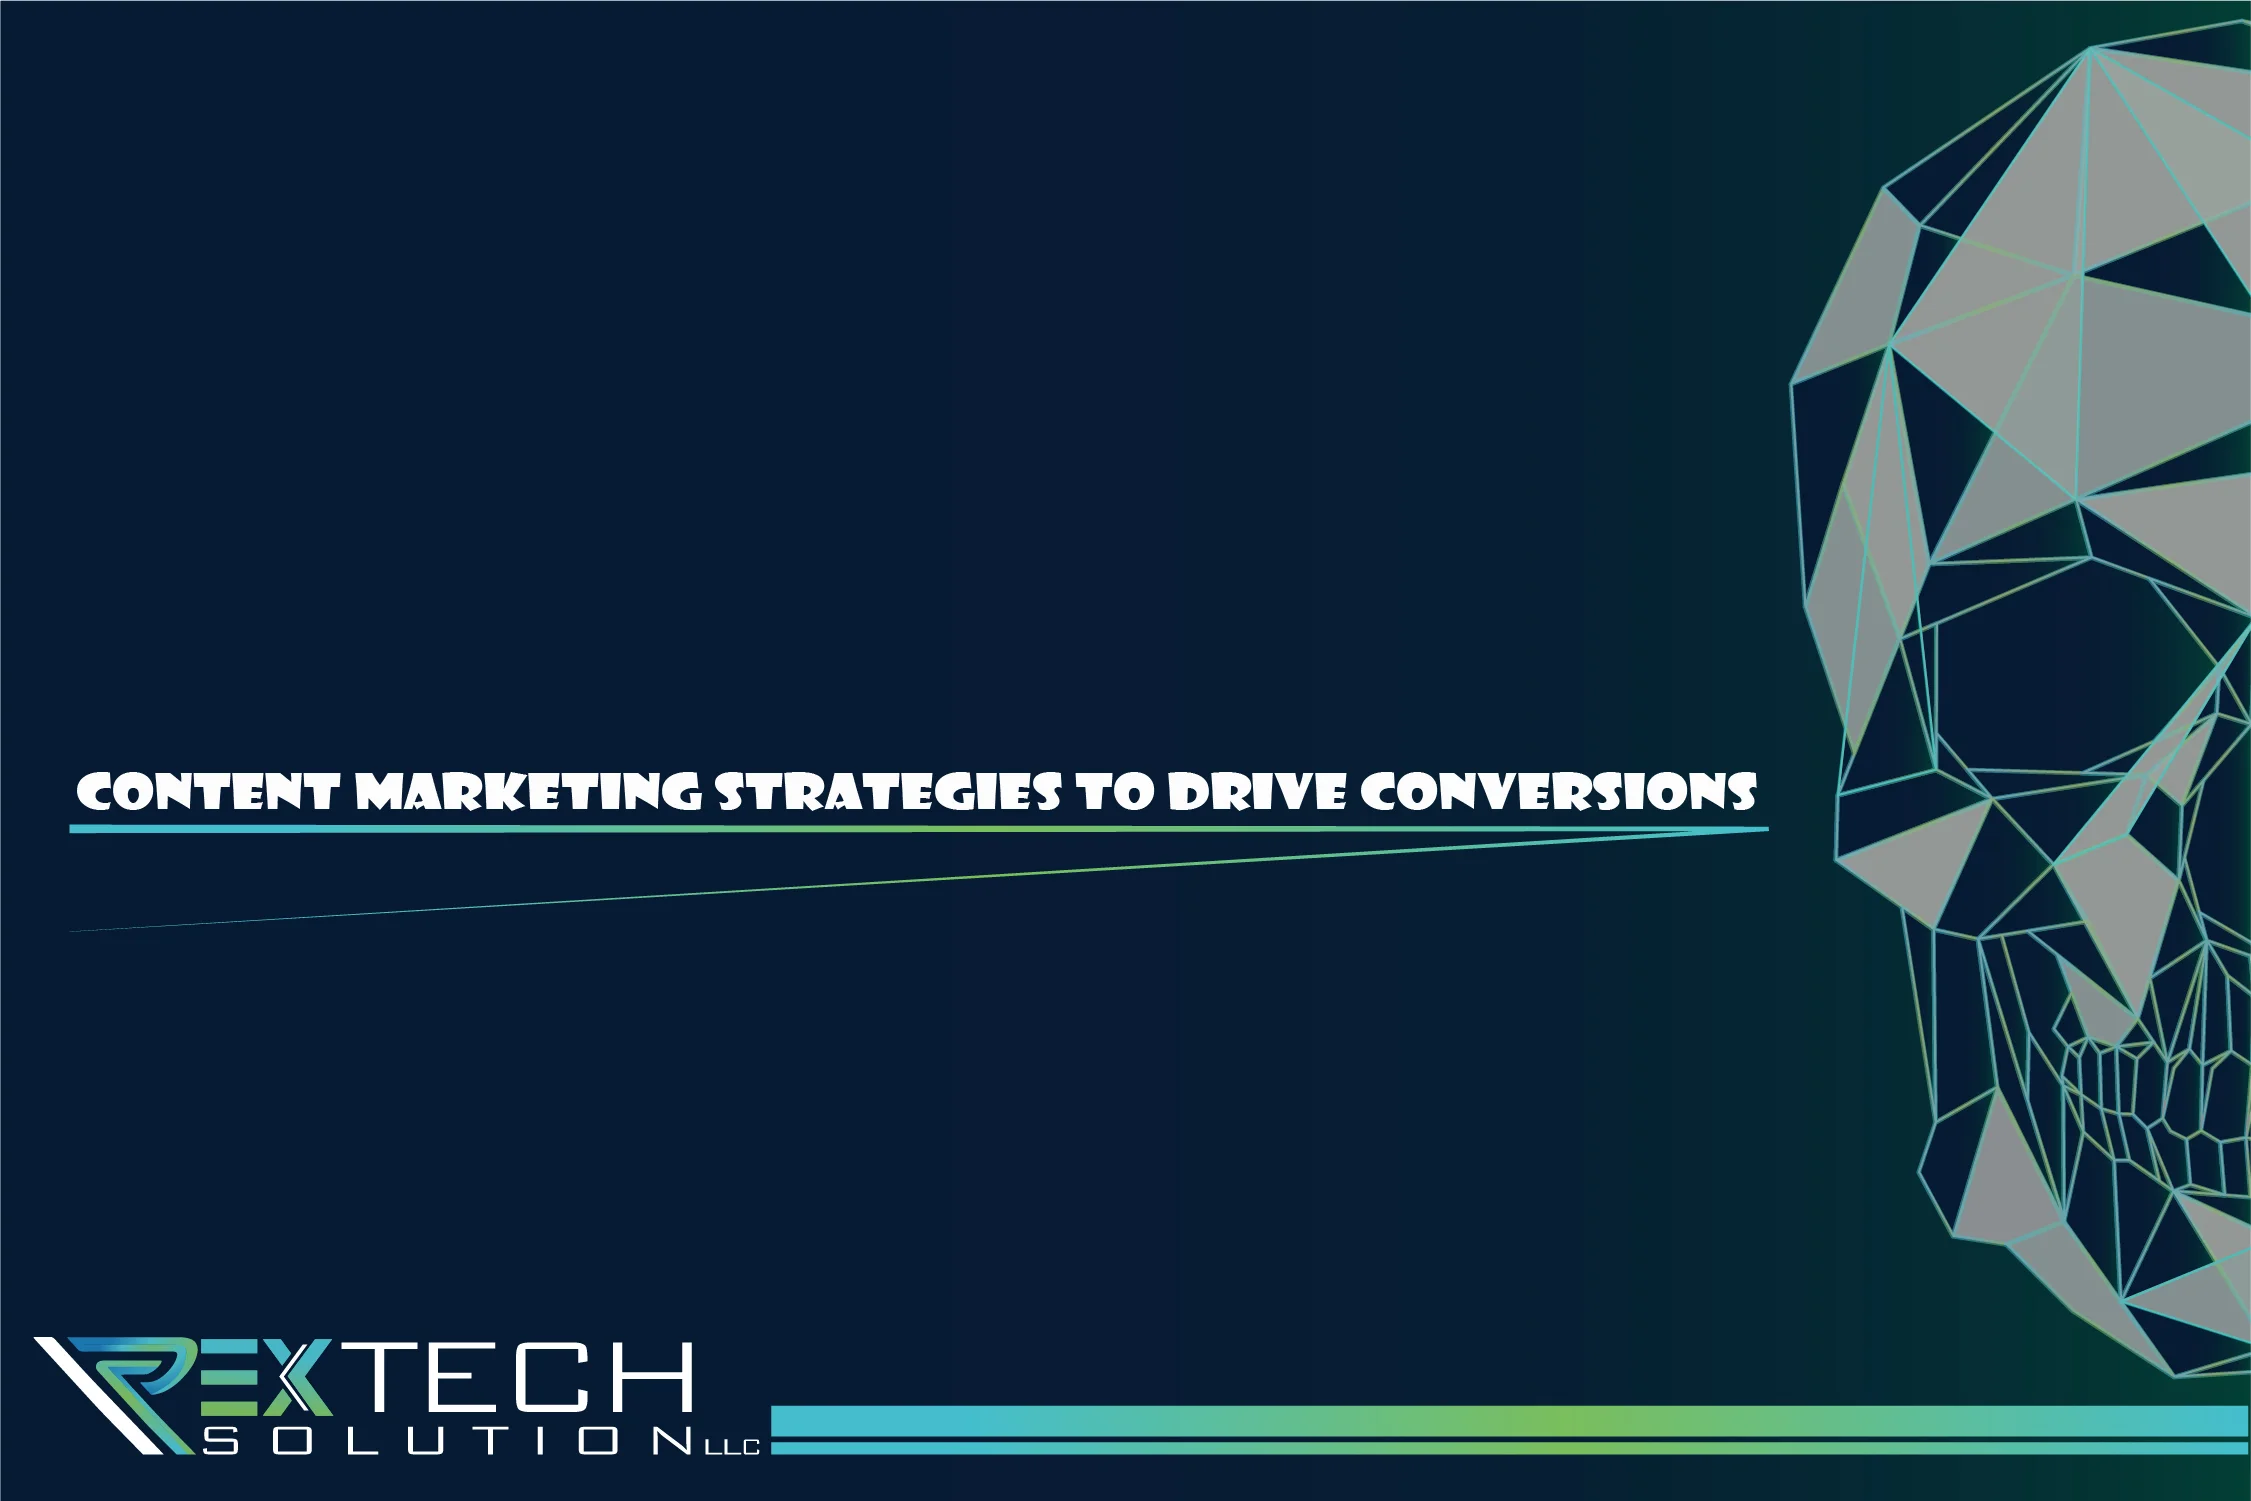 Content Marketing Strategies to Drive Conversions